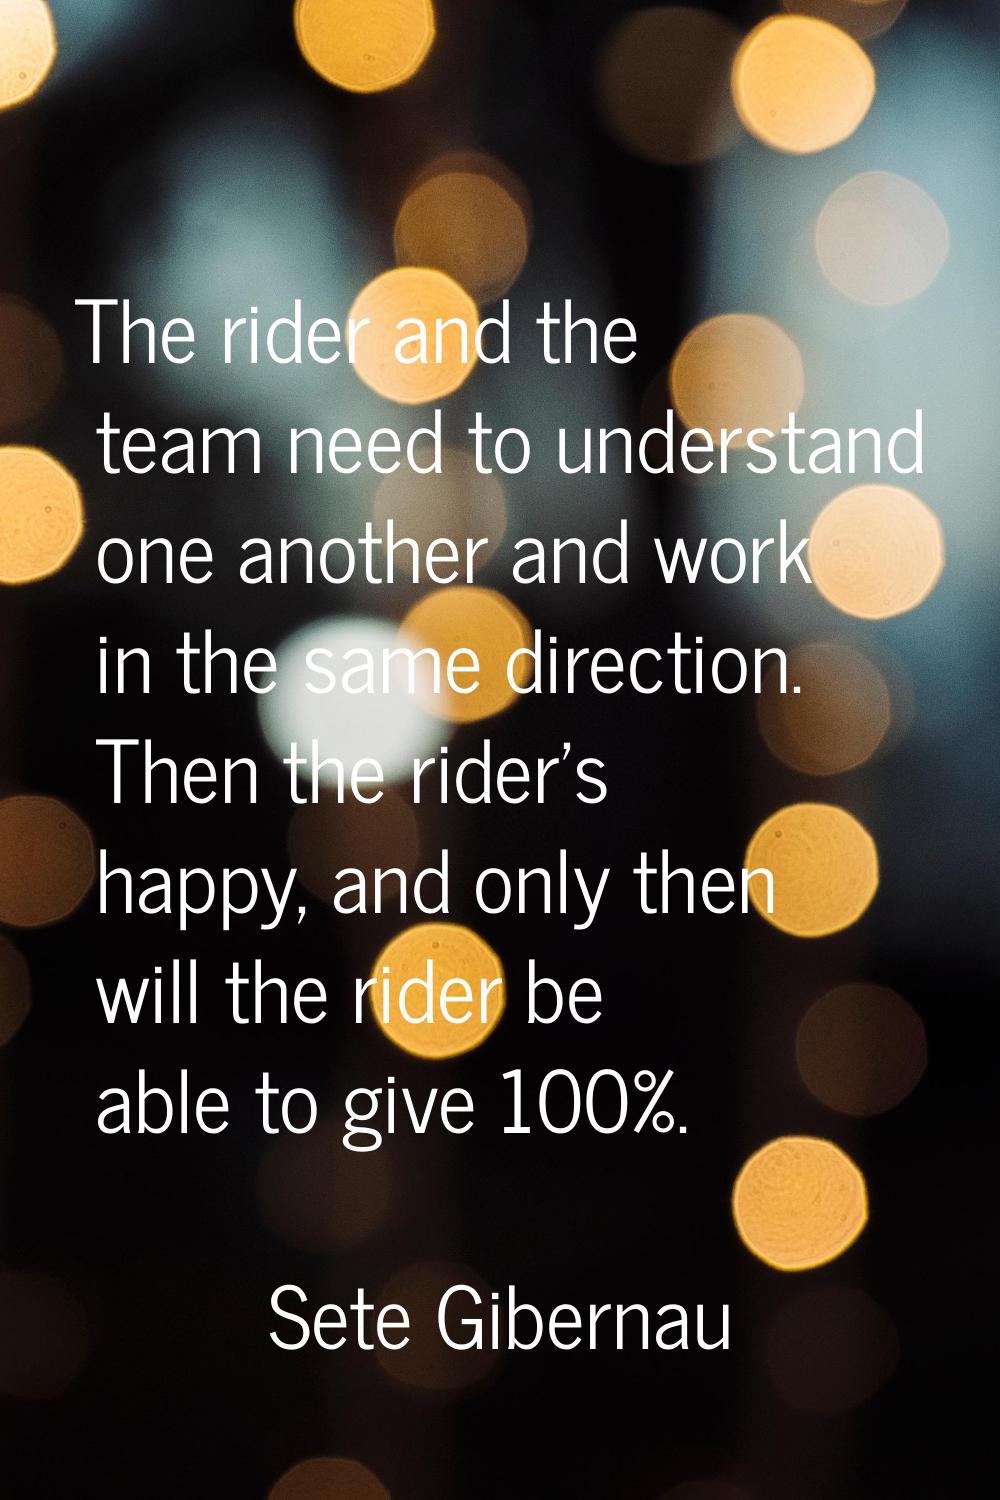 The rider and the team need to understand one another and work in the same direction. Then the ride